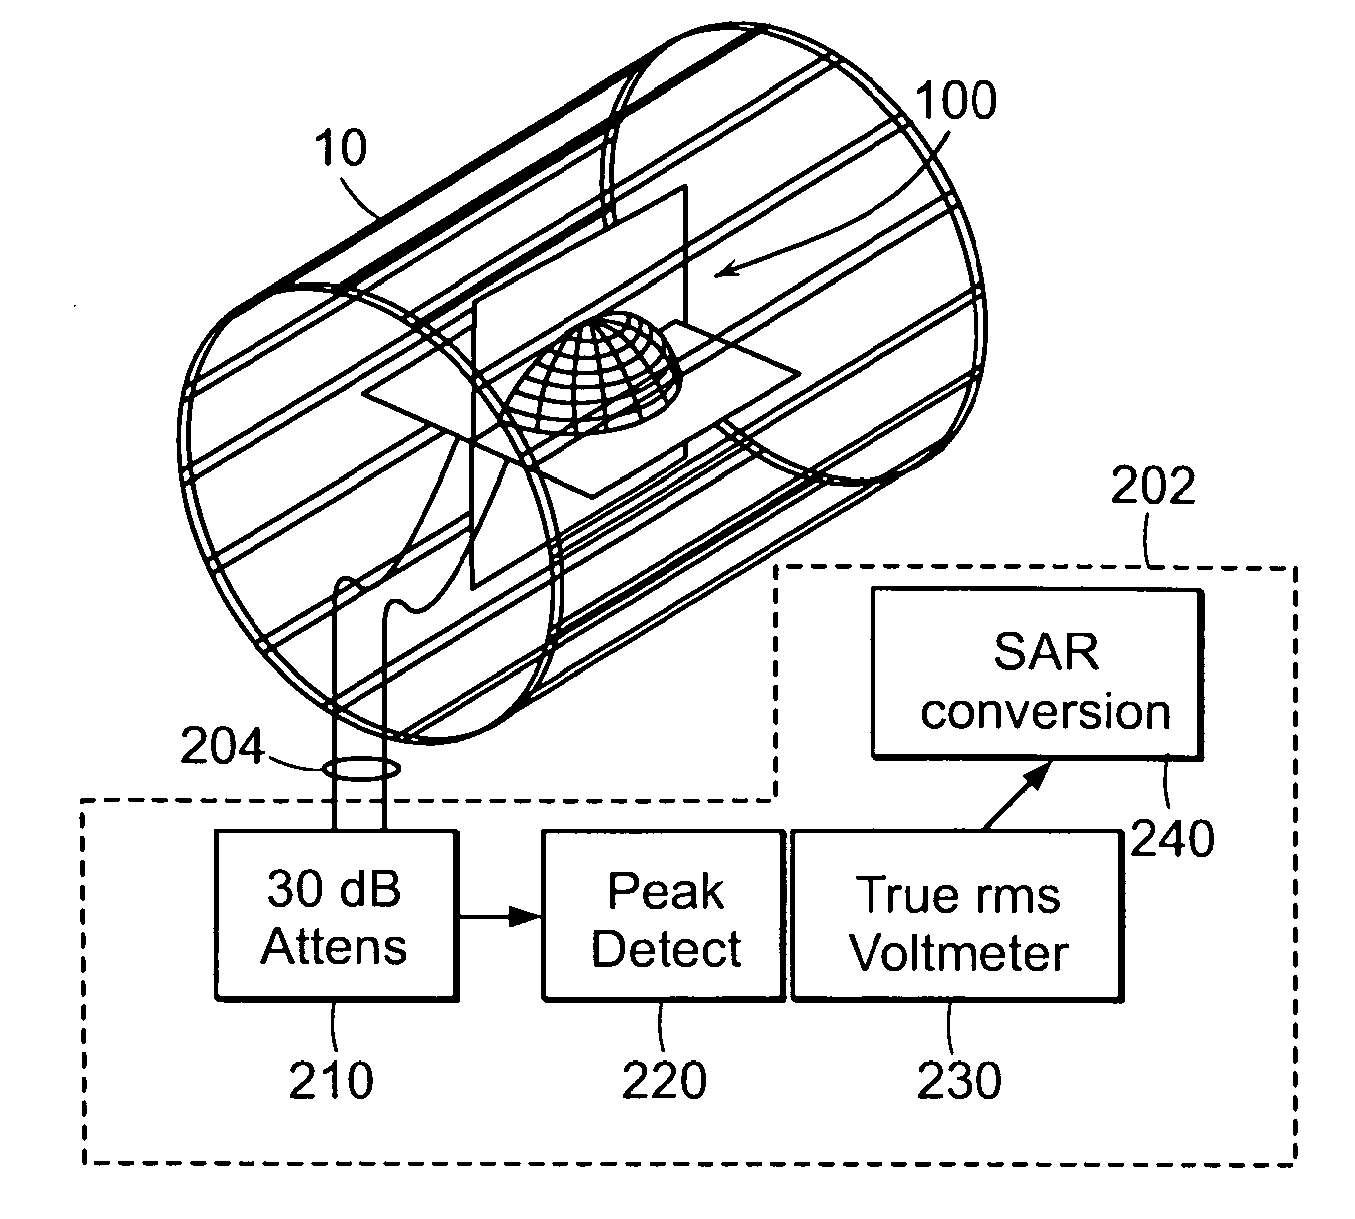 SAR dosimeter for RF power deposition in MRI and methods and systems related thereto